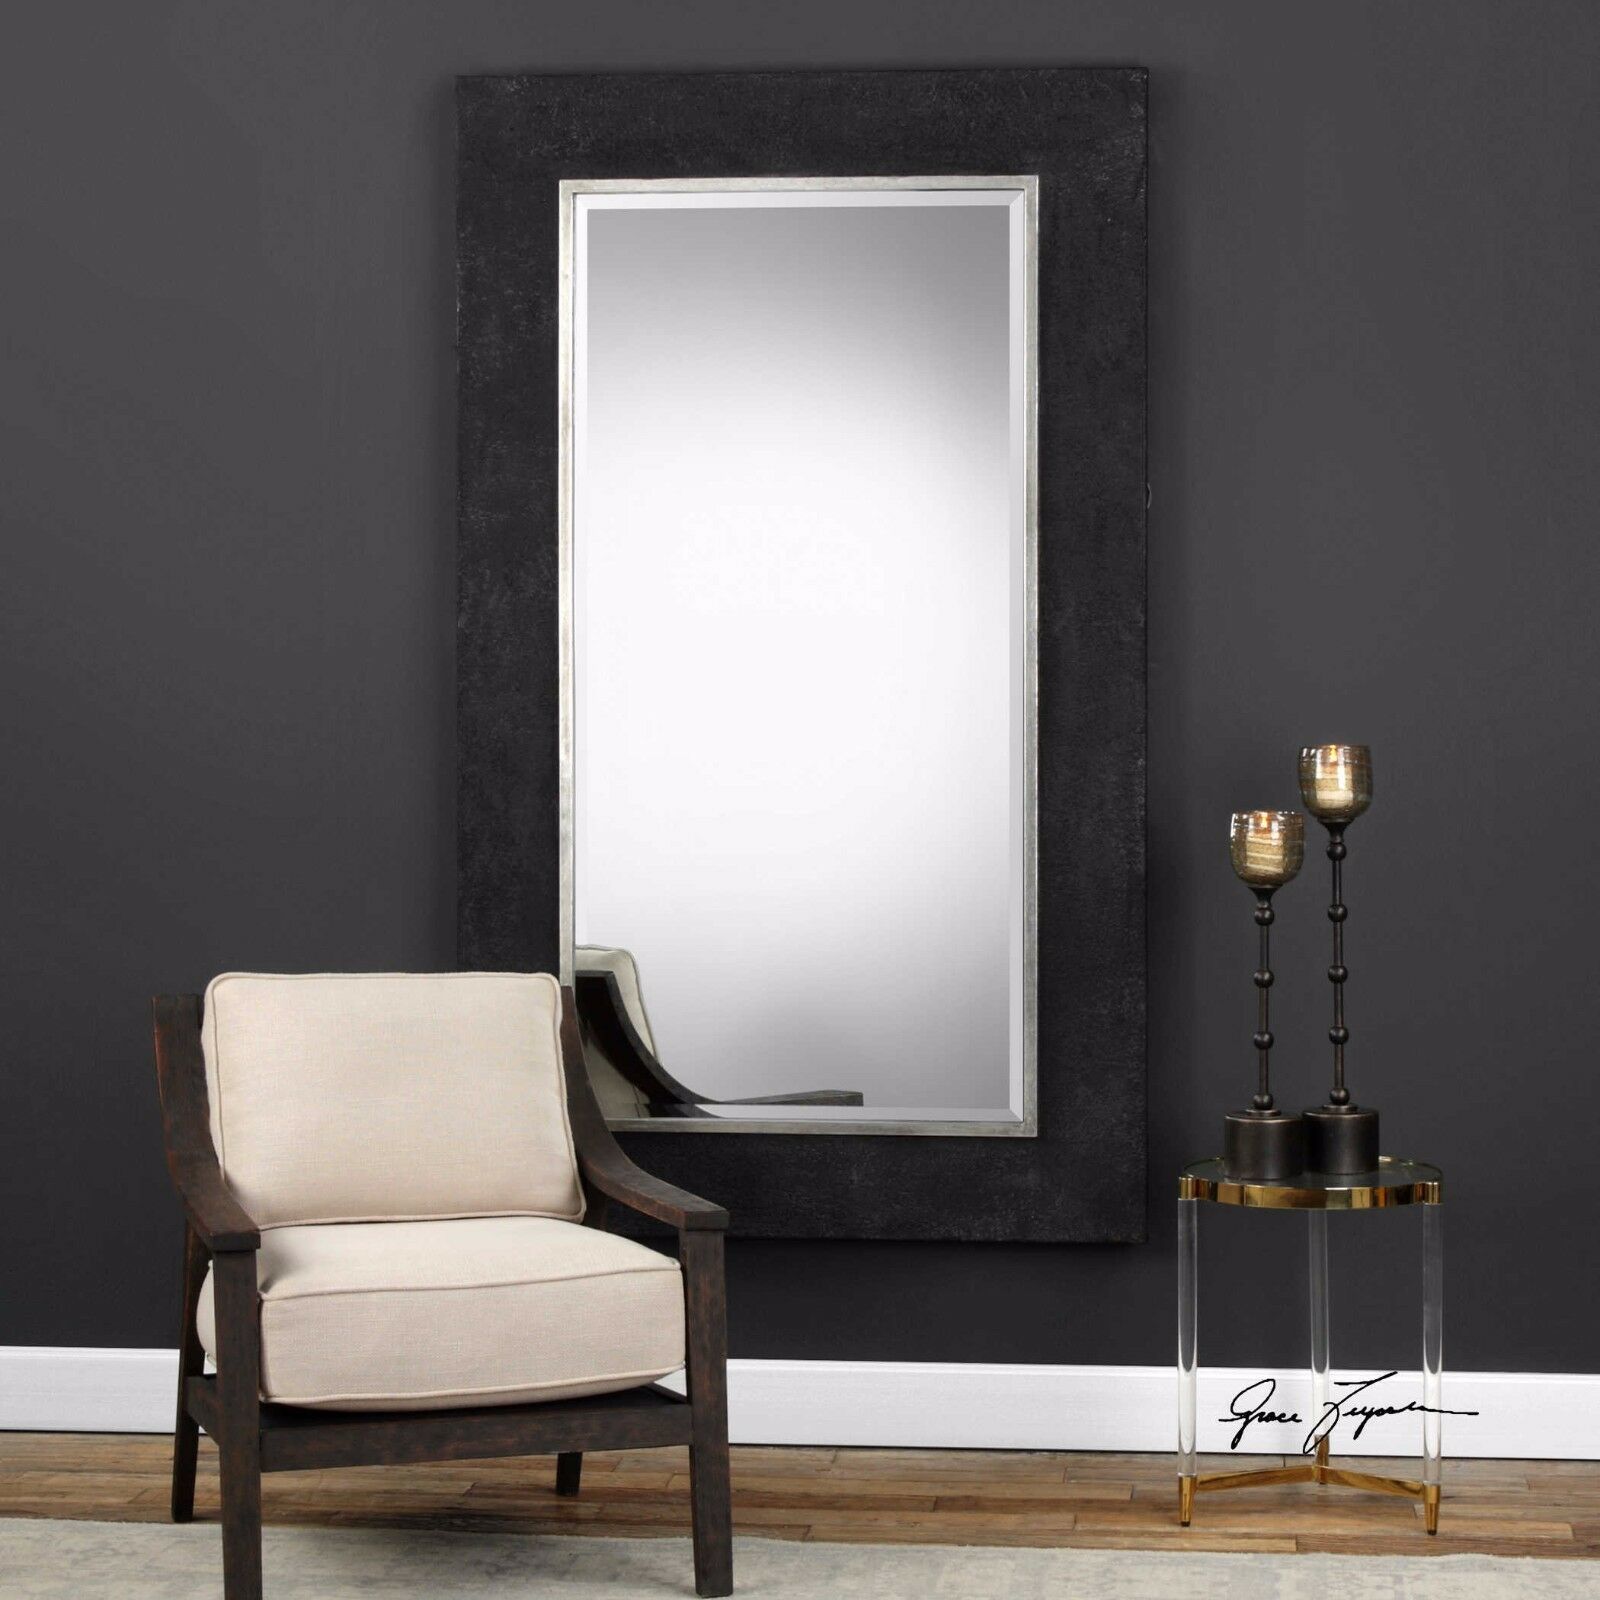 NEW HUGE 73" METAL BEVELED WALL MIRROR AGED TEXTURED BLACK FINISH FULL